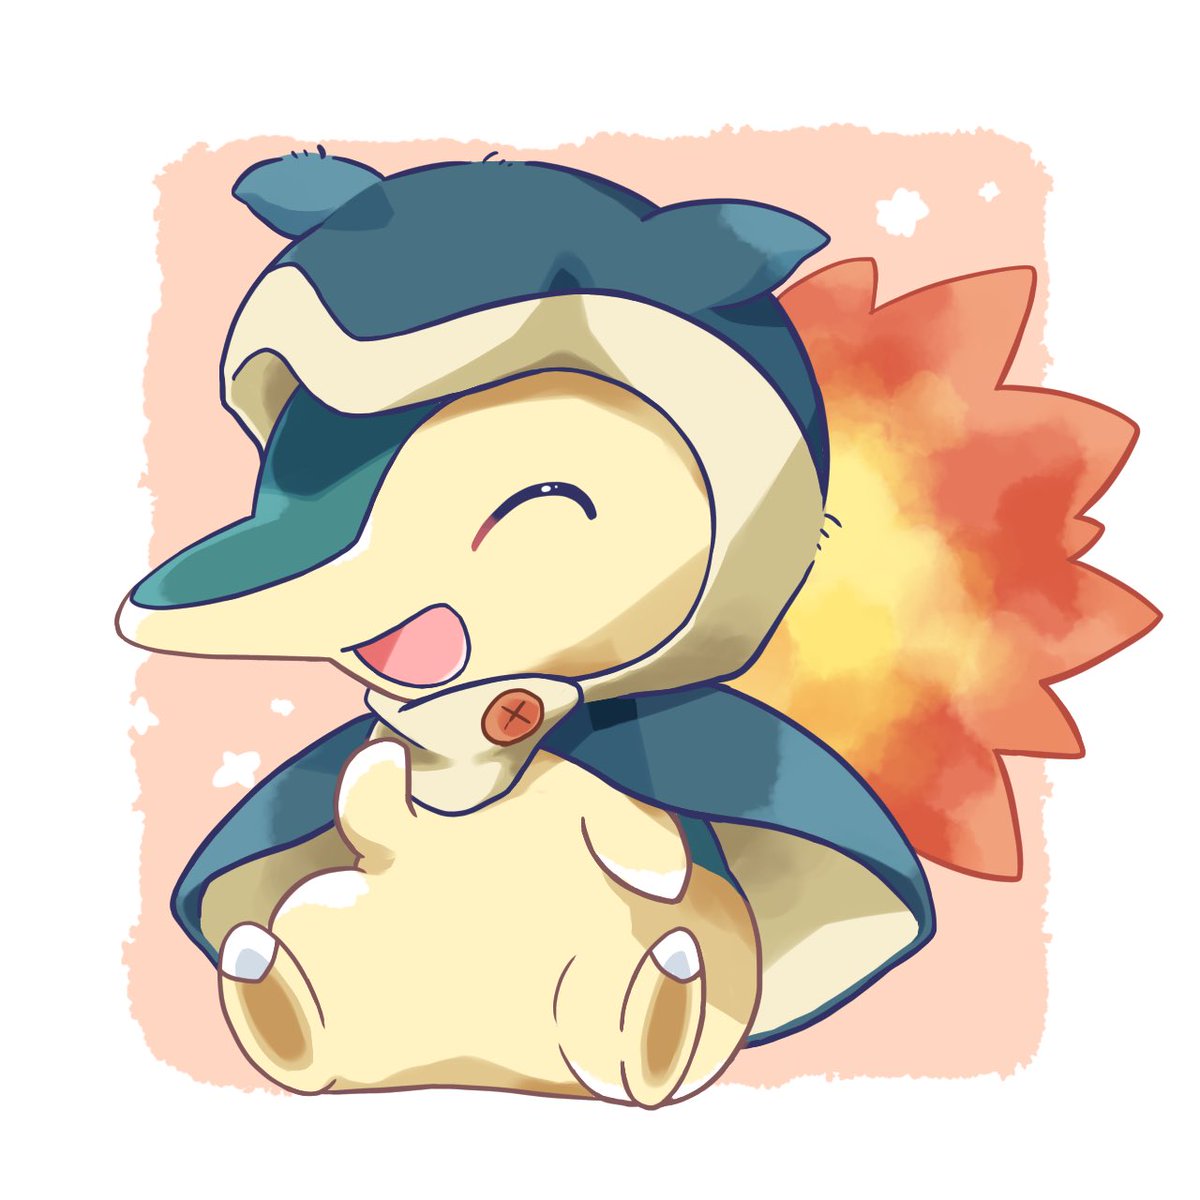 cyndaquil no humans closed eyes pokemon (creature) open mouth solo smile sitting  illustration images